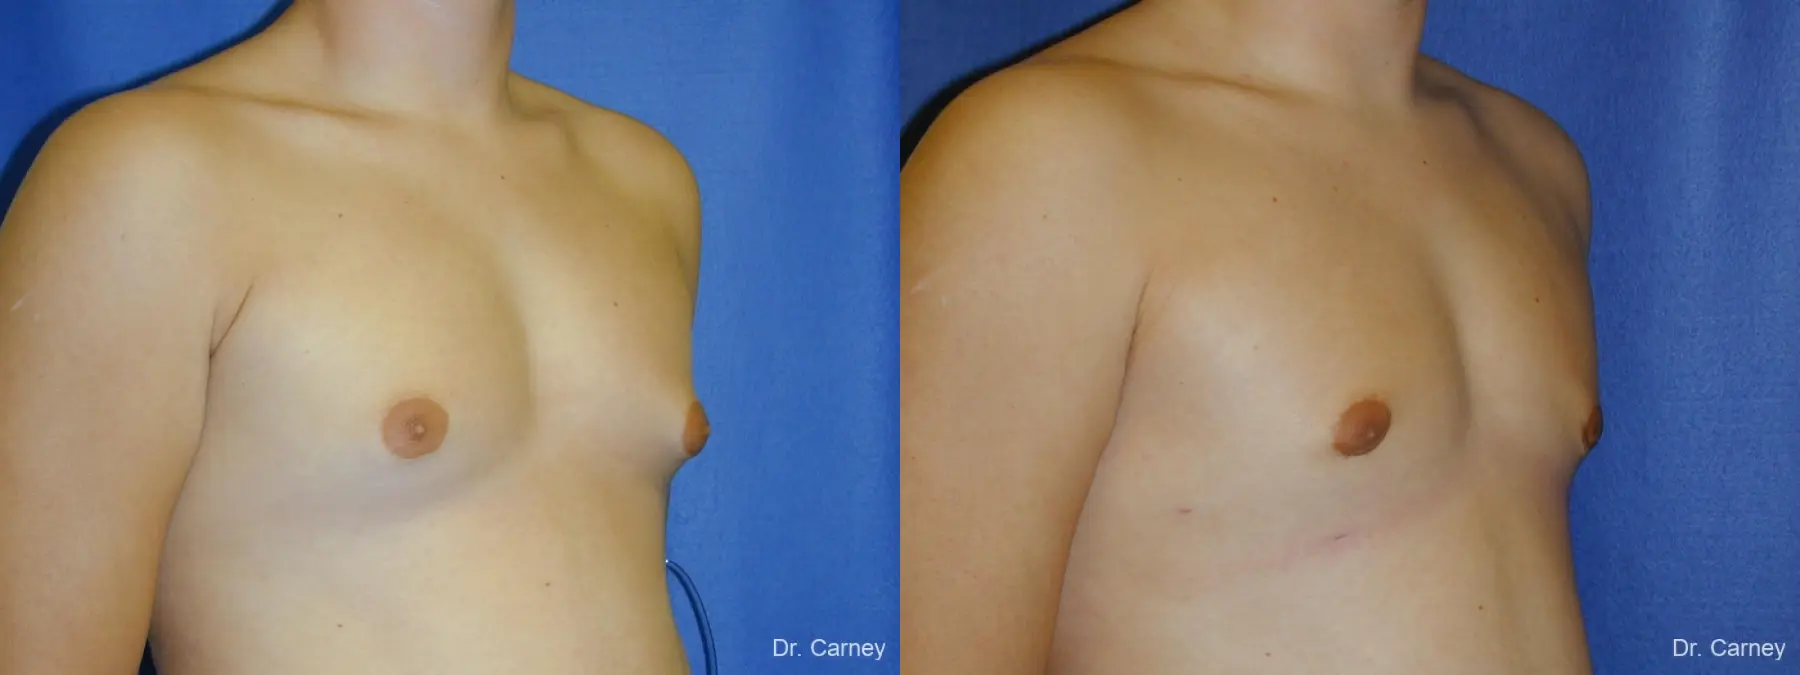 Virginia Beach Gynecomastia - Before and After 2